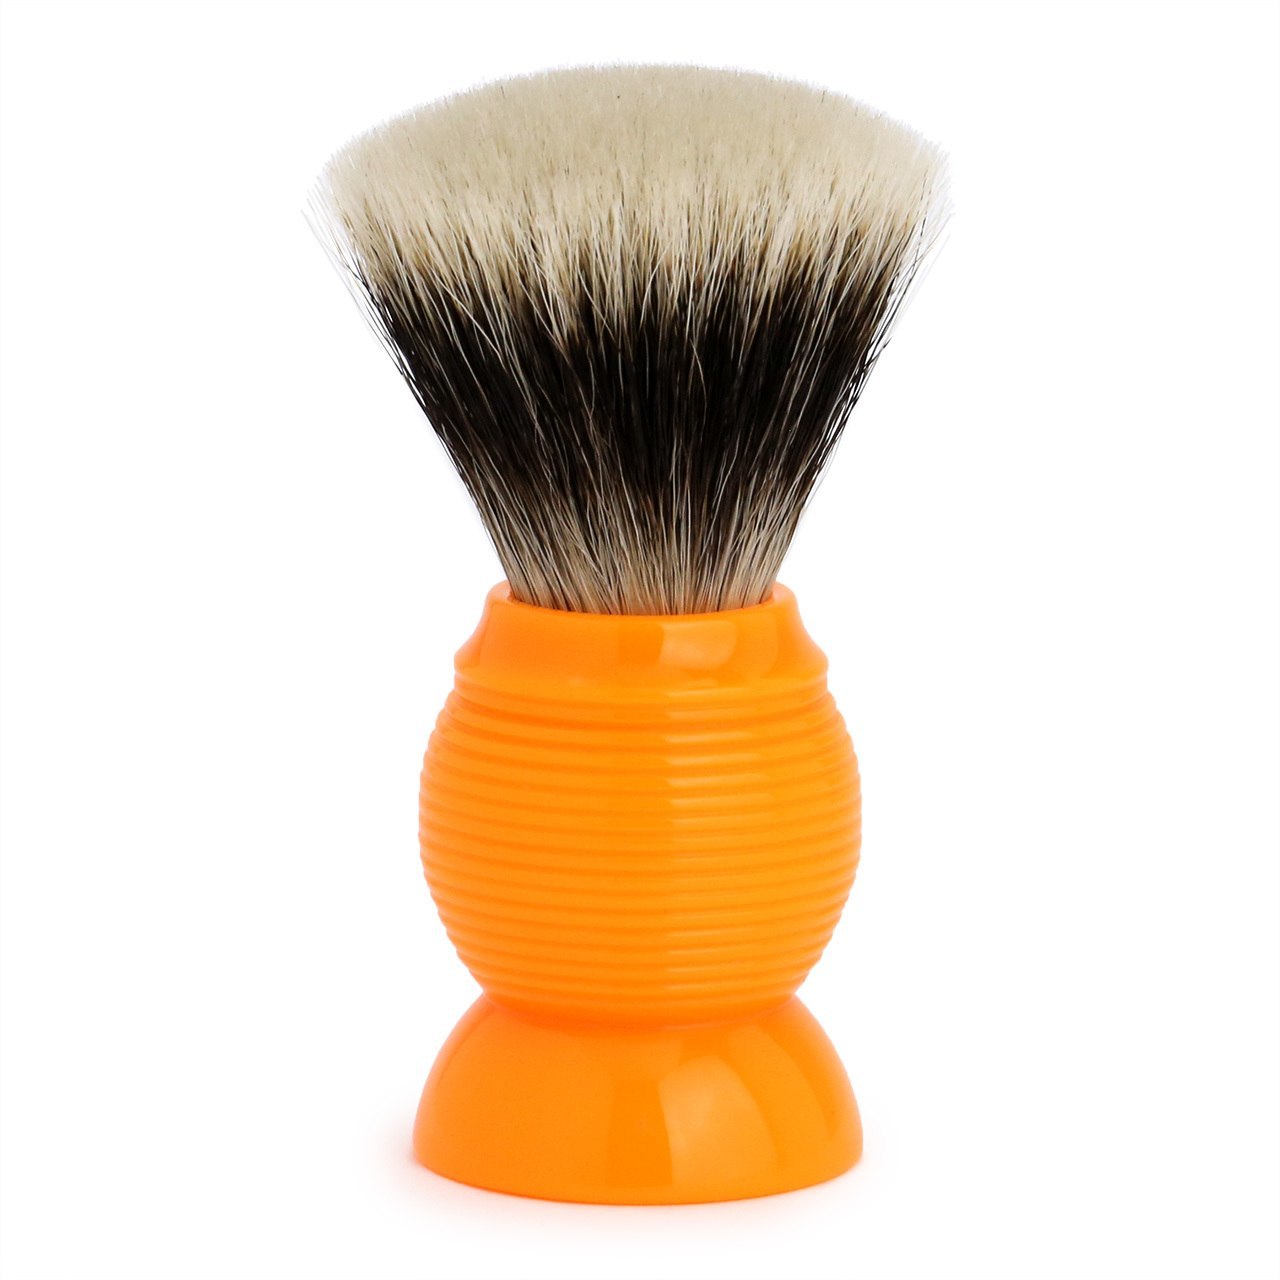 "The Leura" 2 Band Finest Badger Shave Brush in Sunset Colour